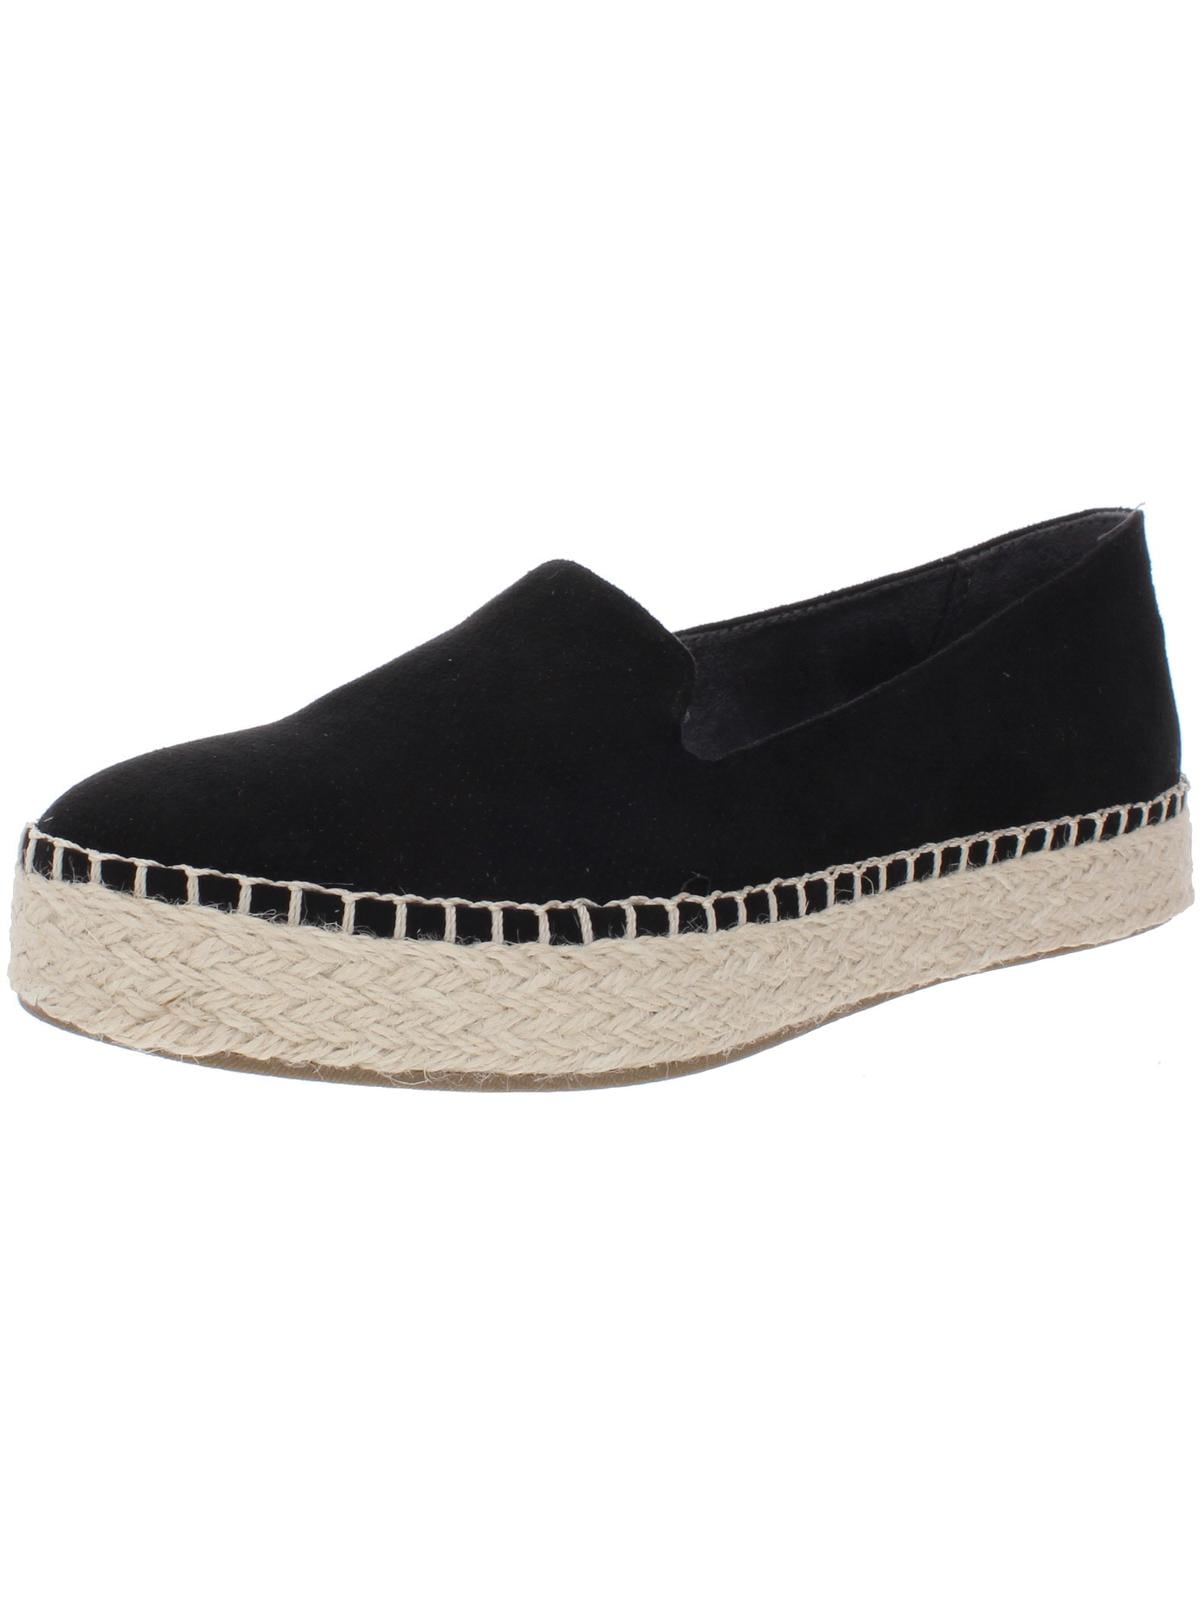 Dr. Scholl's Shoes Womens Find Me Perforated Slip On Espadrilles ...